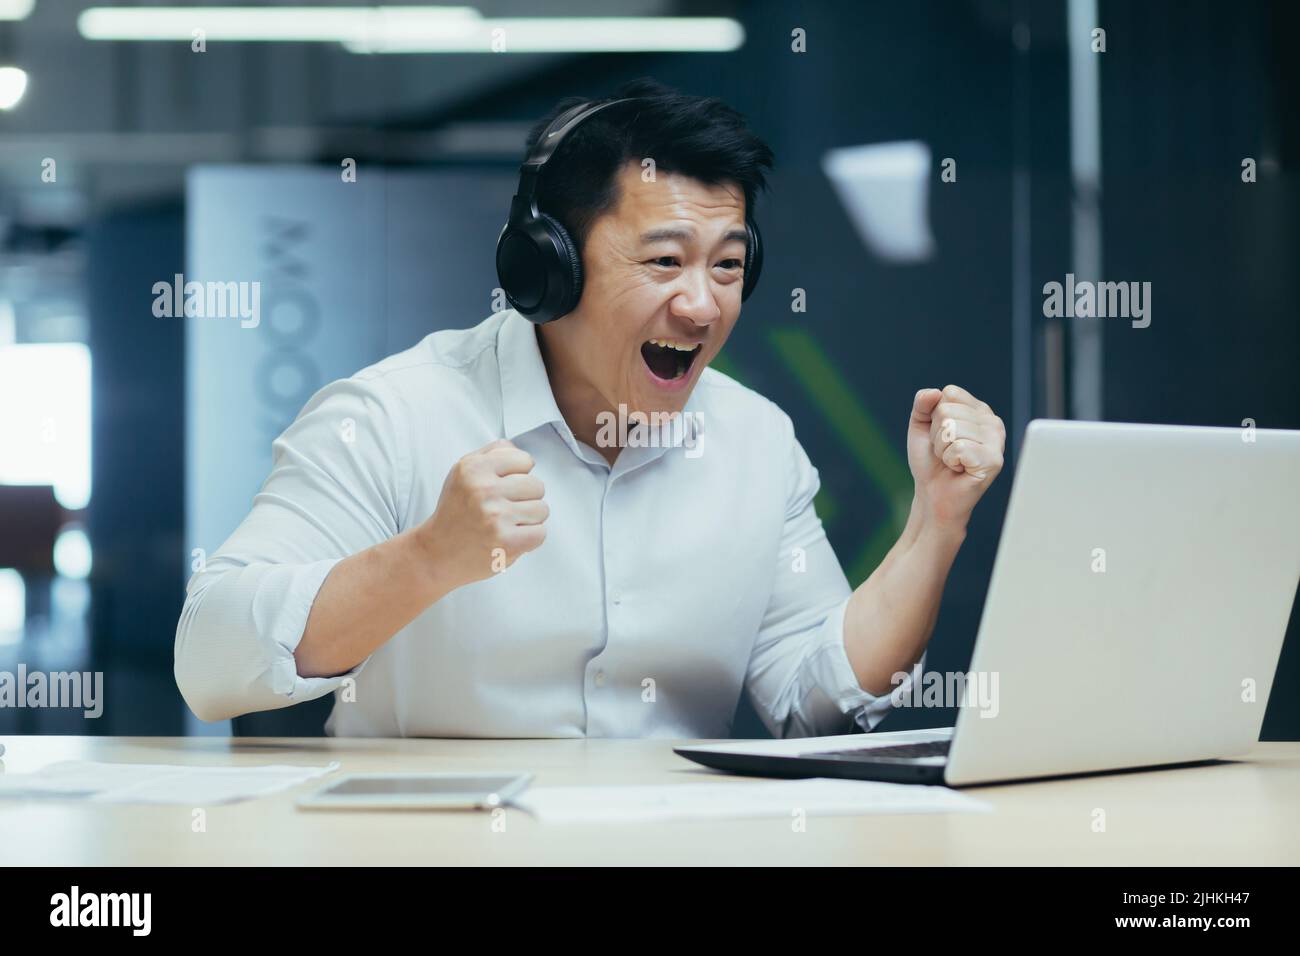 Happy Asian businessman watching sports match online, man in office looking at laptop screen cheerfully cheering Stock Photo